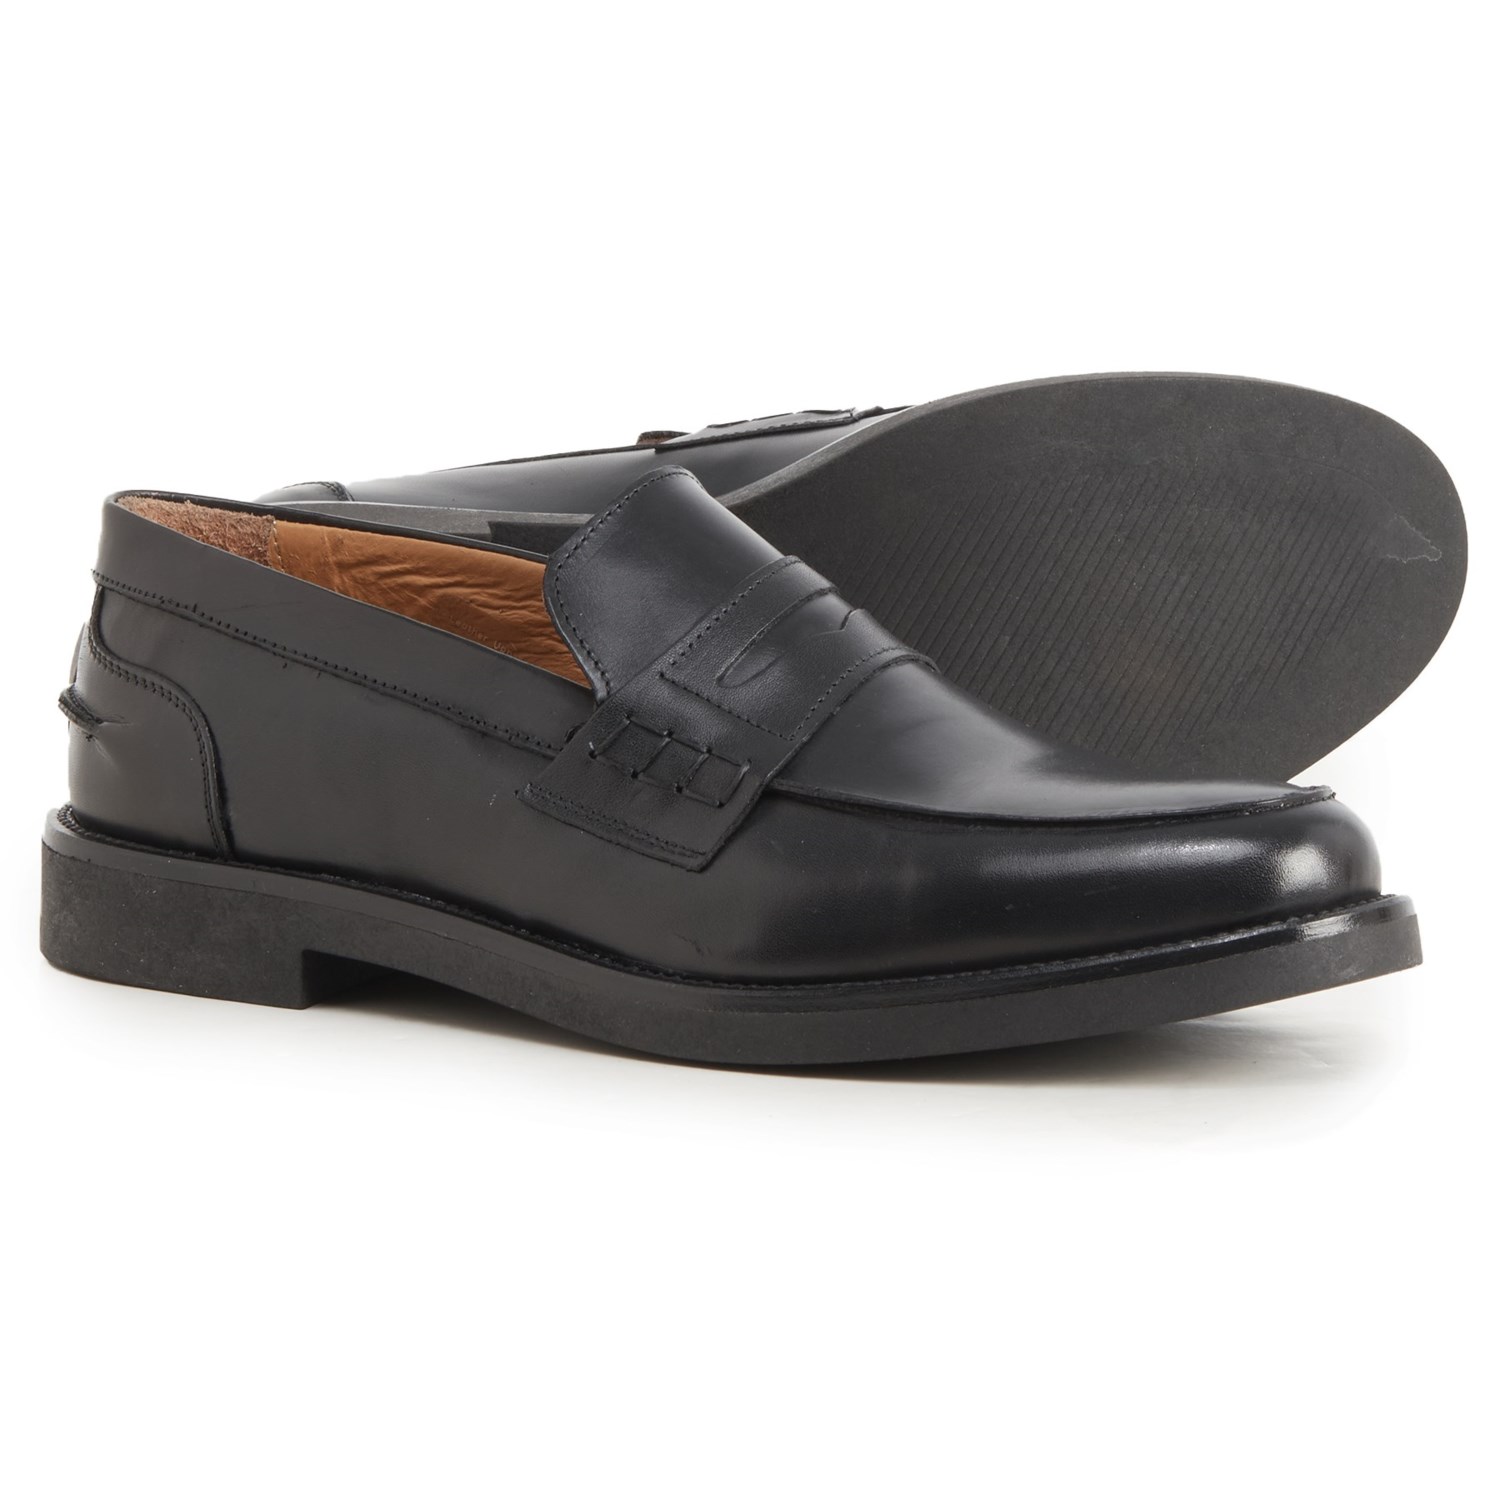 ITALIA DIFFERENCE Made in Italy Penny Loafers - Leather (For Men)